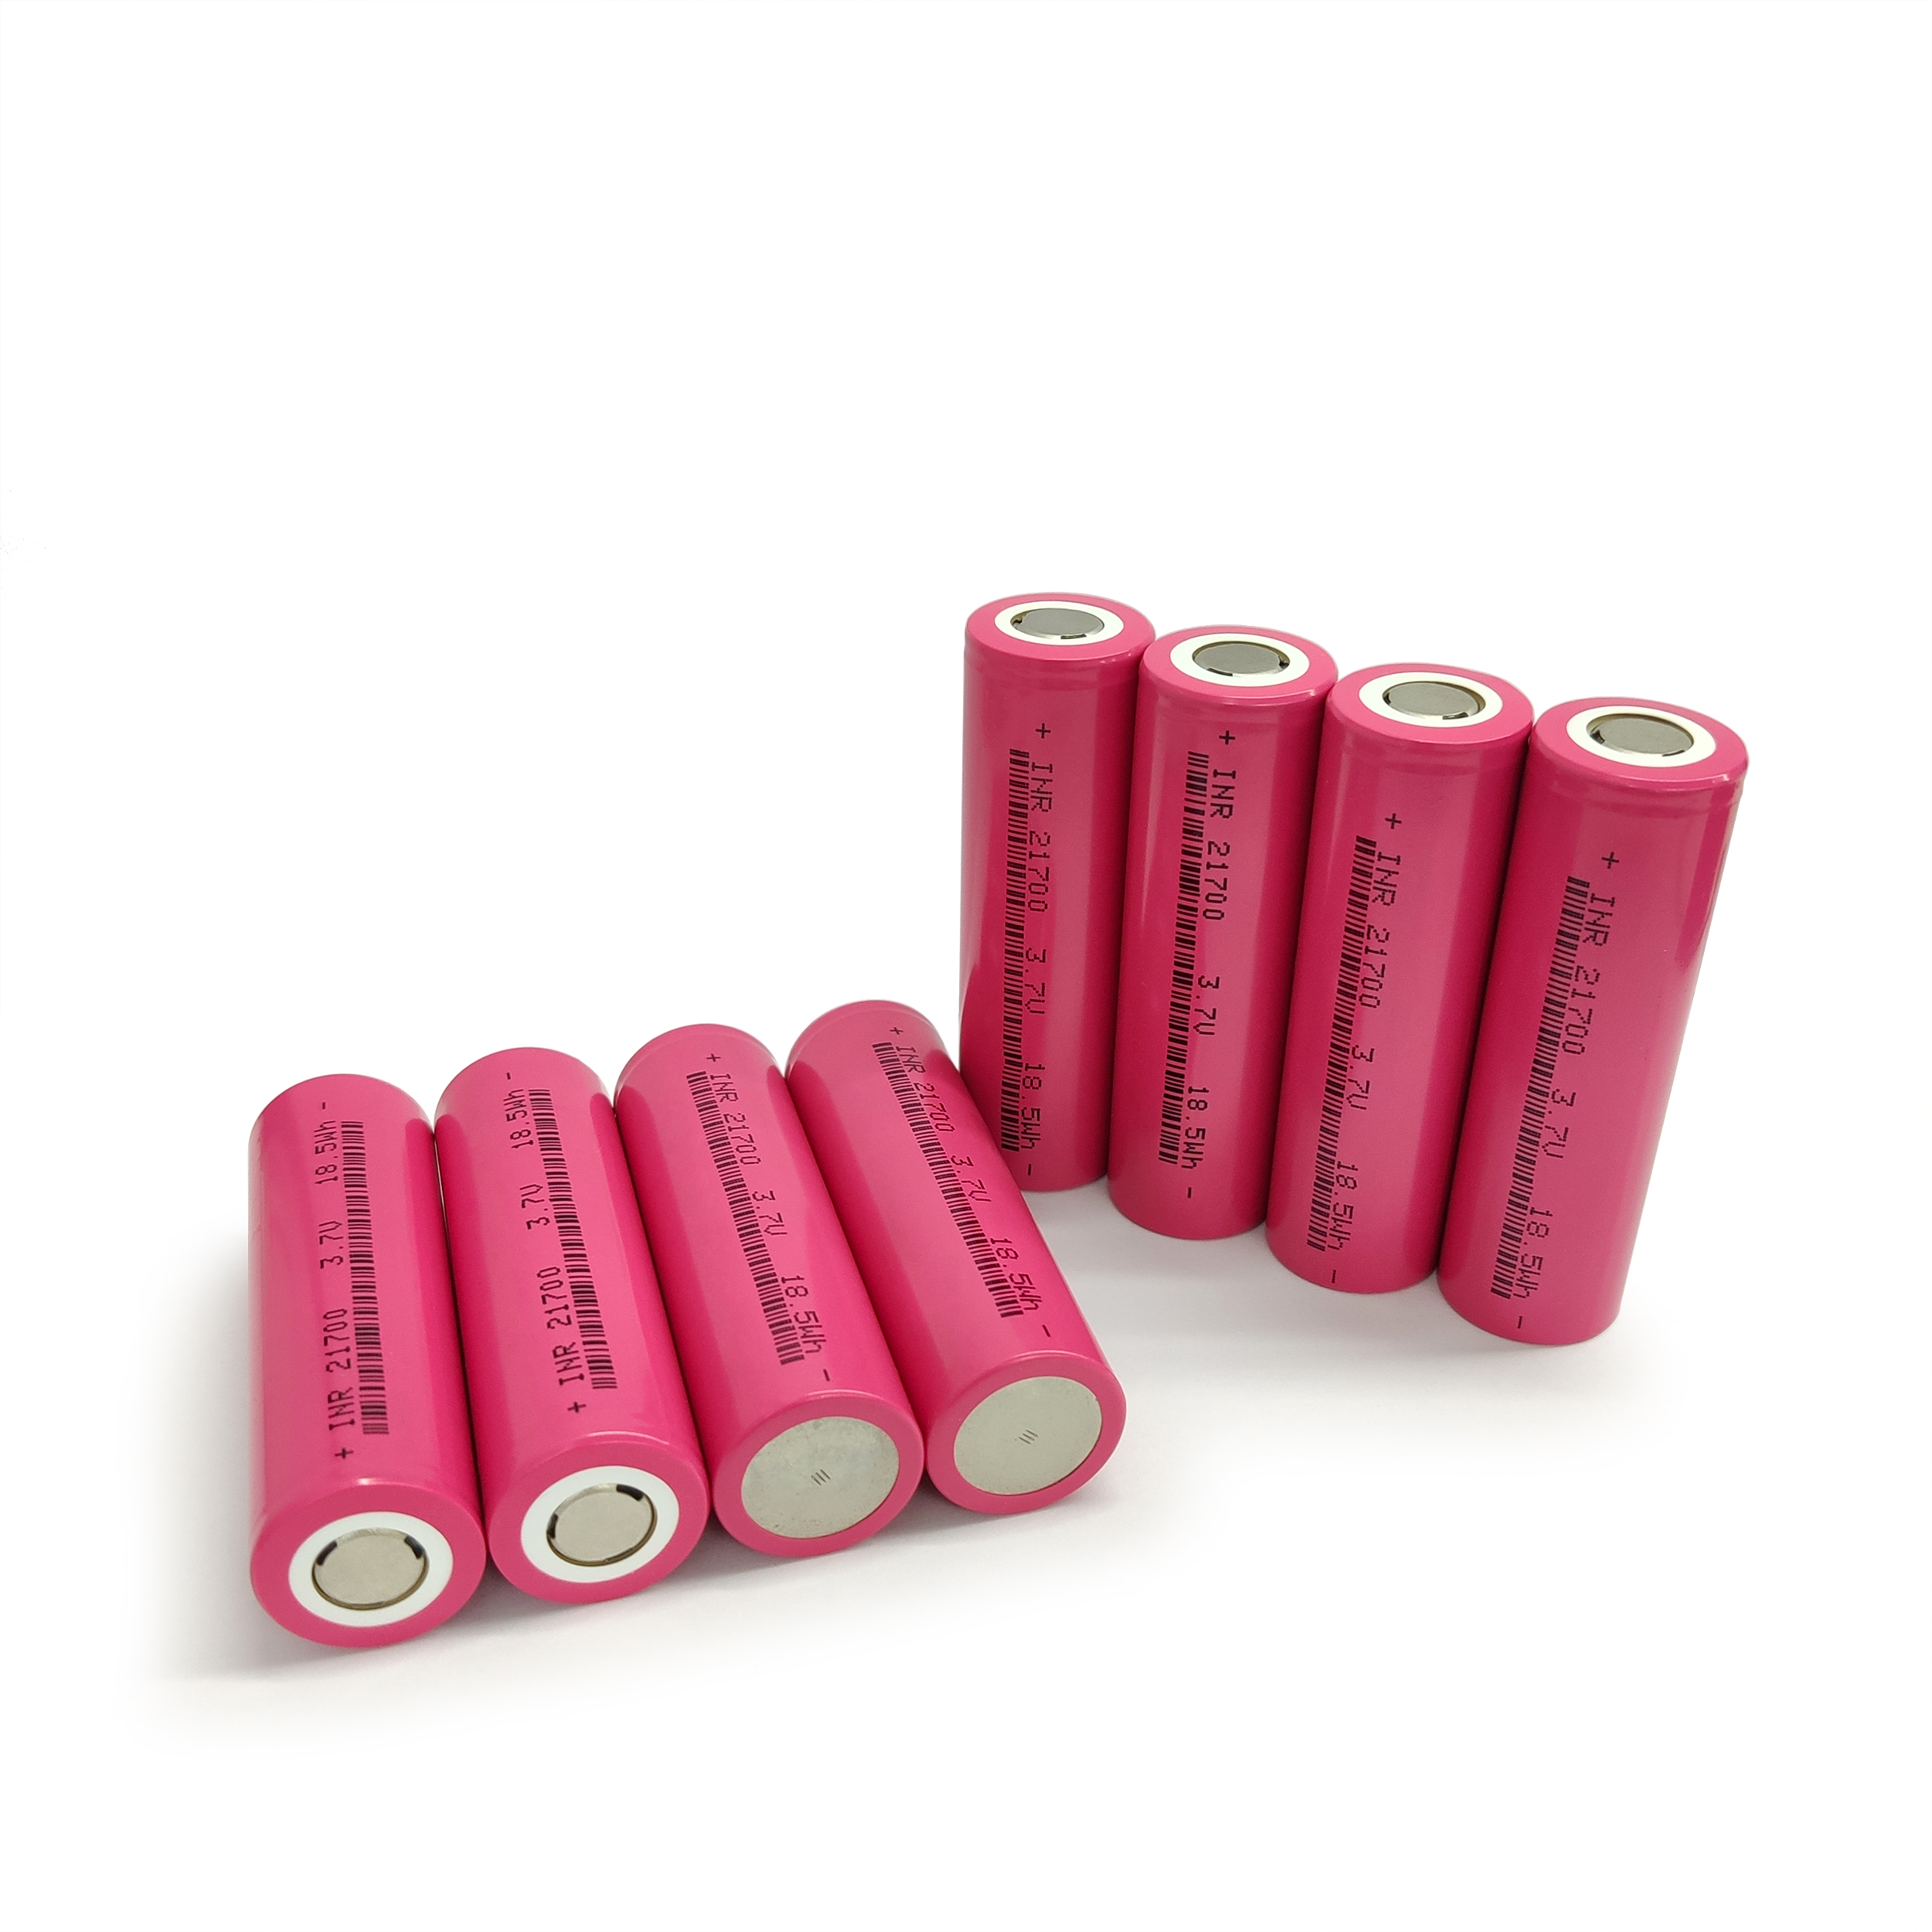 A&S Power 21700 3.7v 4500/4800/5000mAh lithium ion battery cell